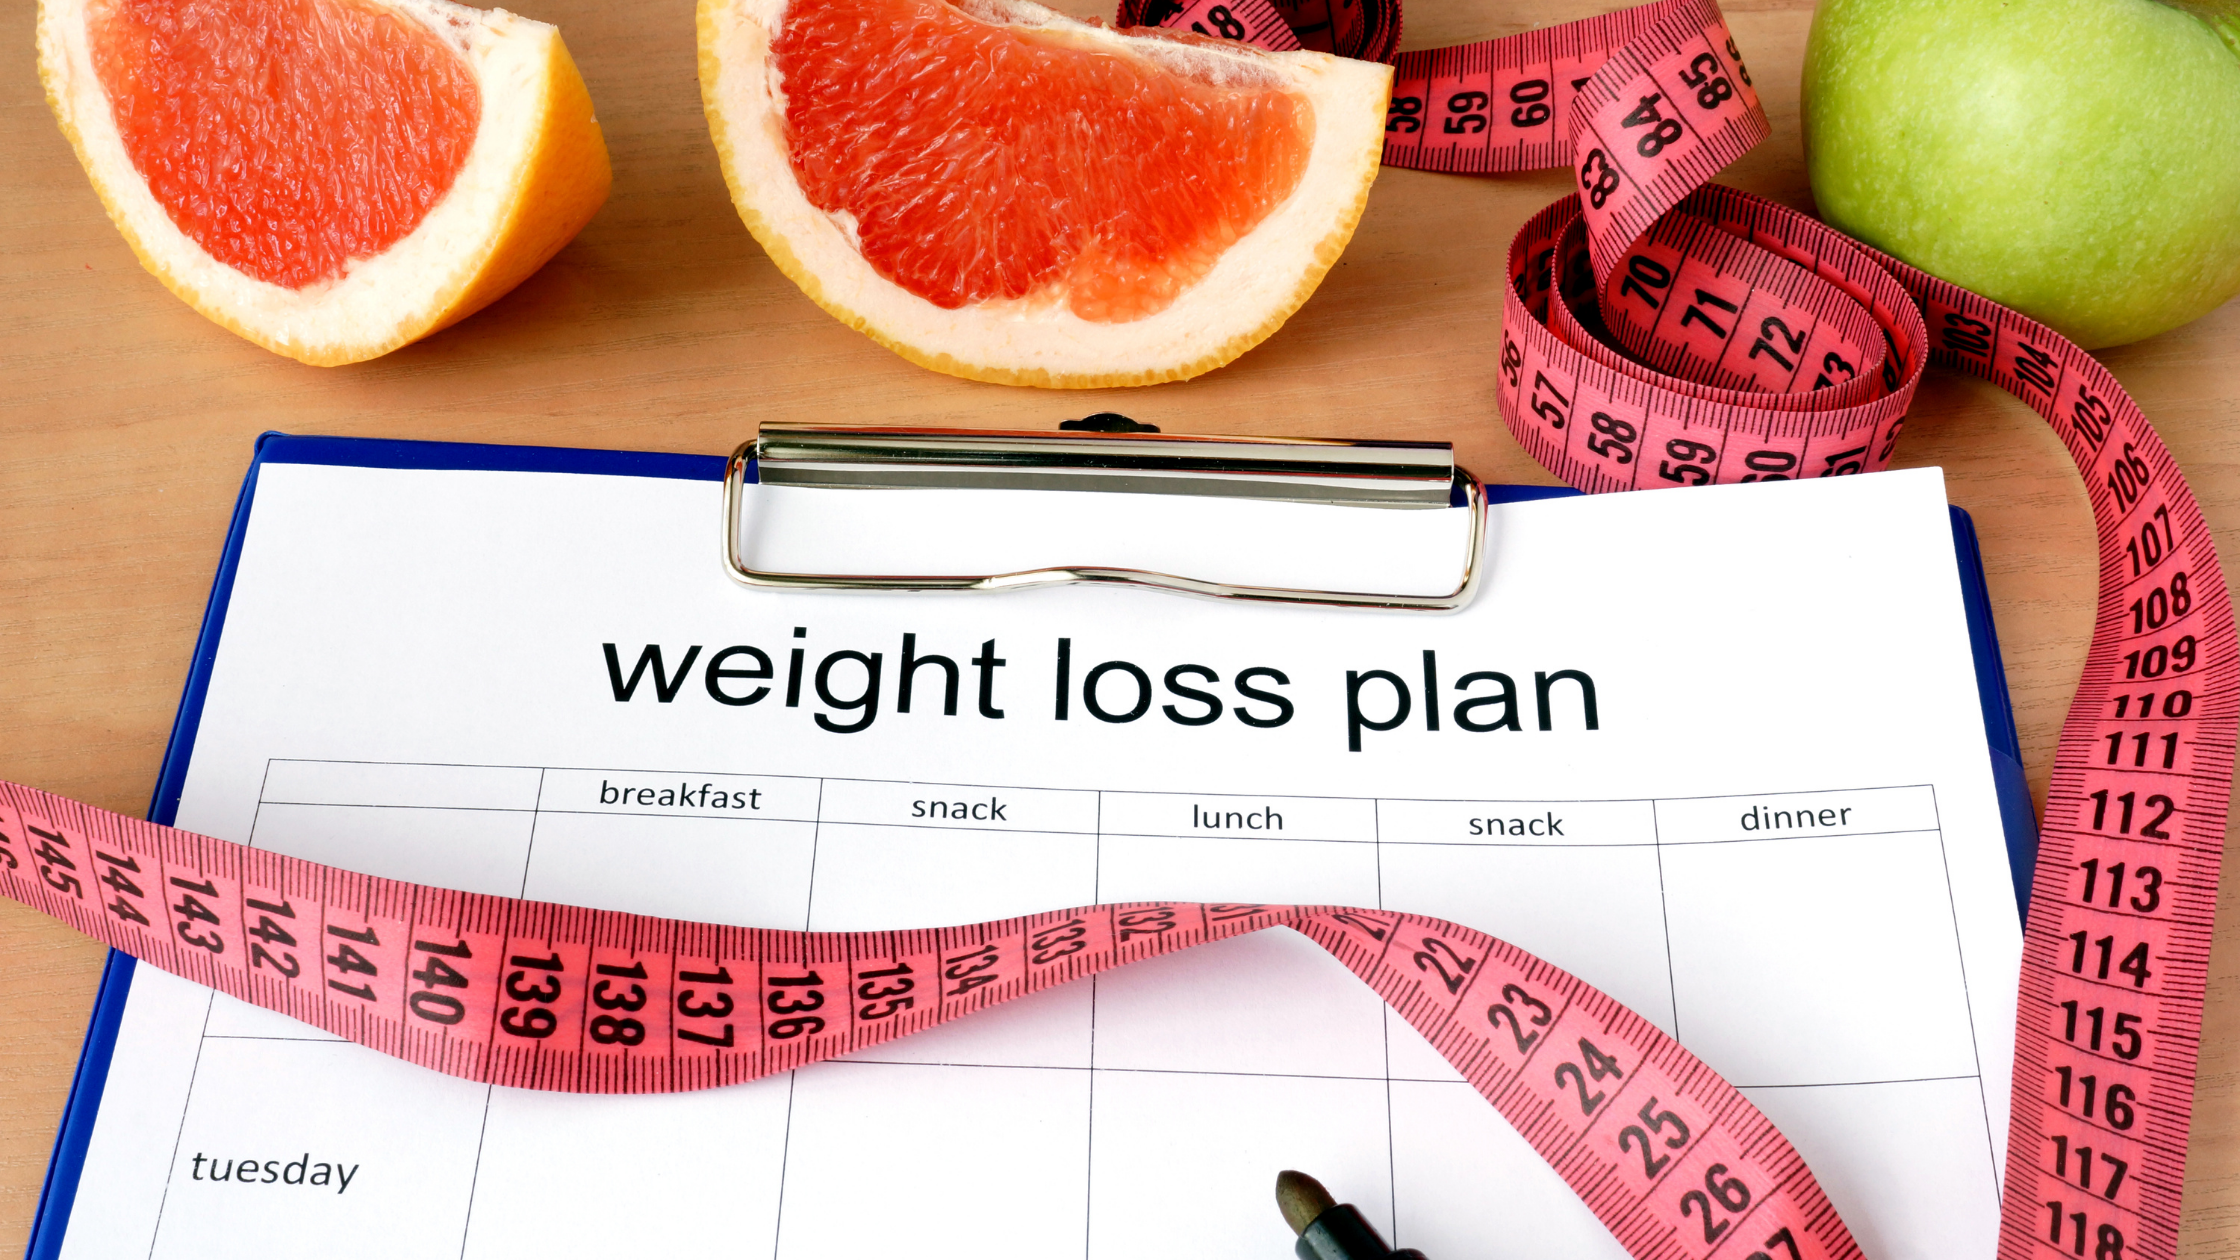 Clip-board labeled, "Weight Loss Plan", with a measuring tape and slice grapefruit beside it